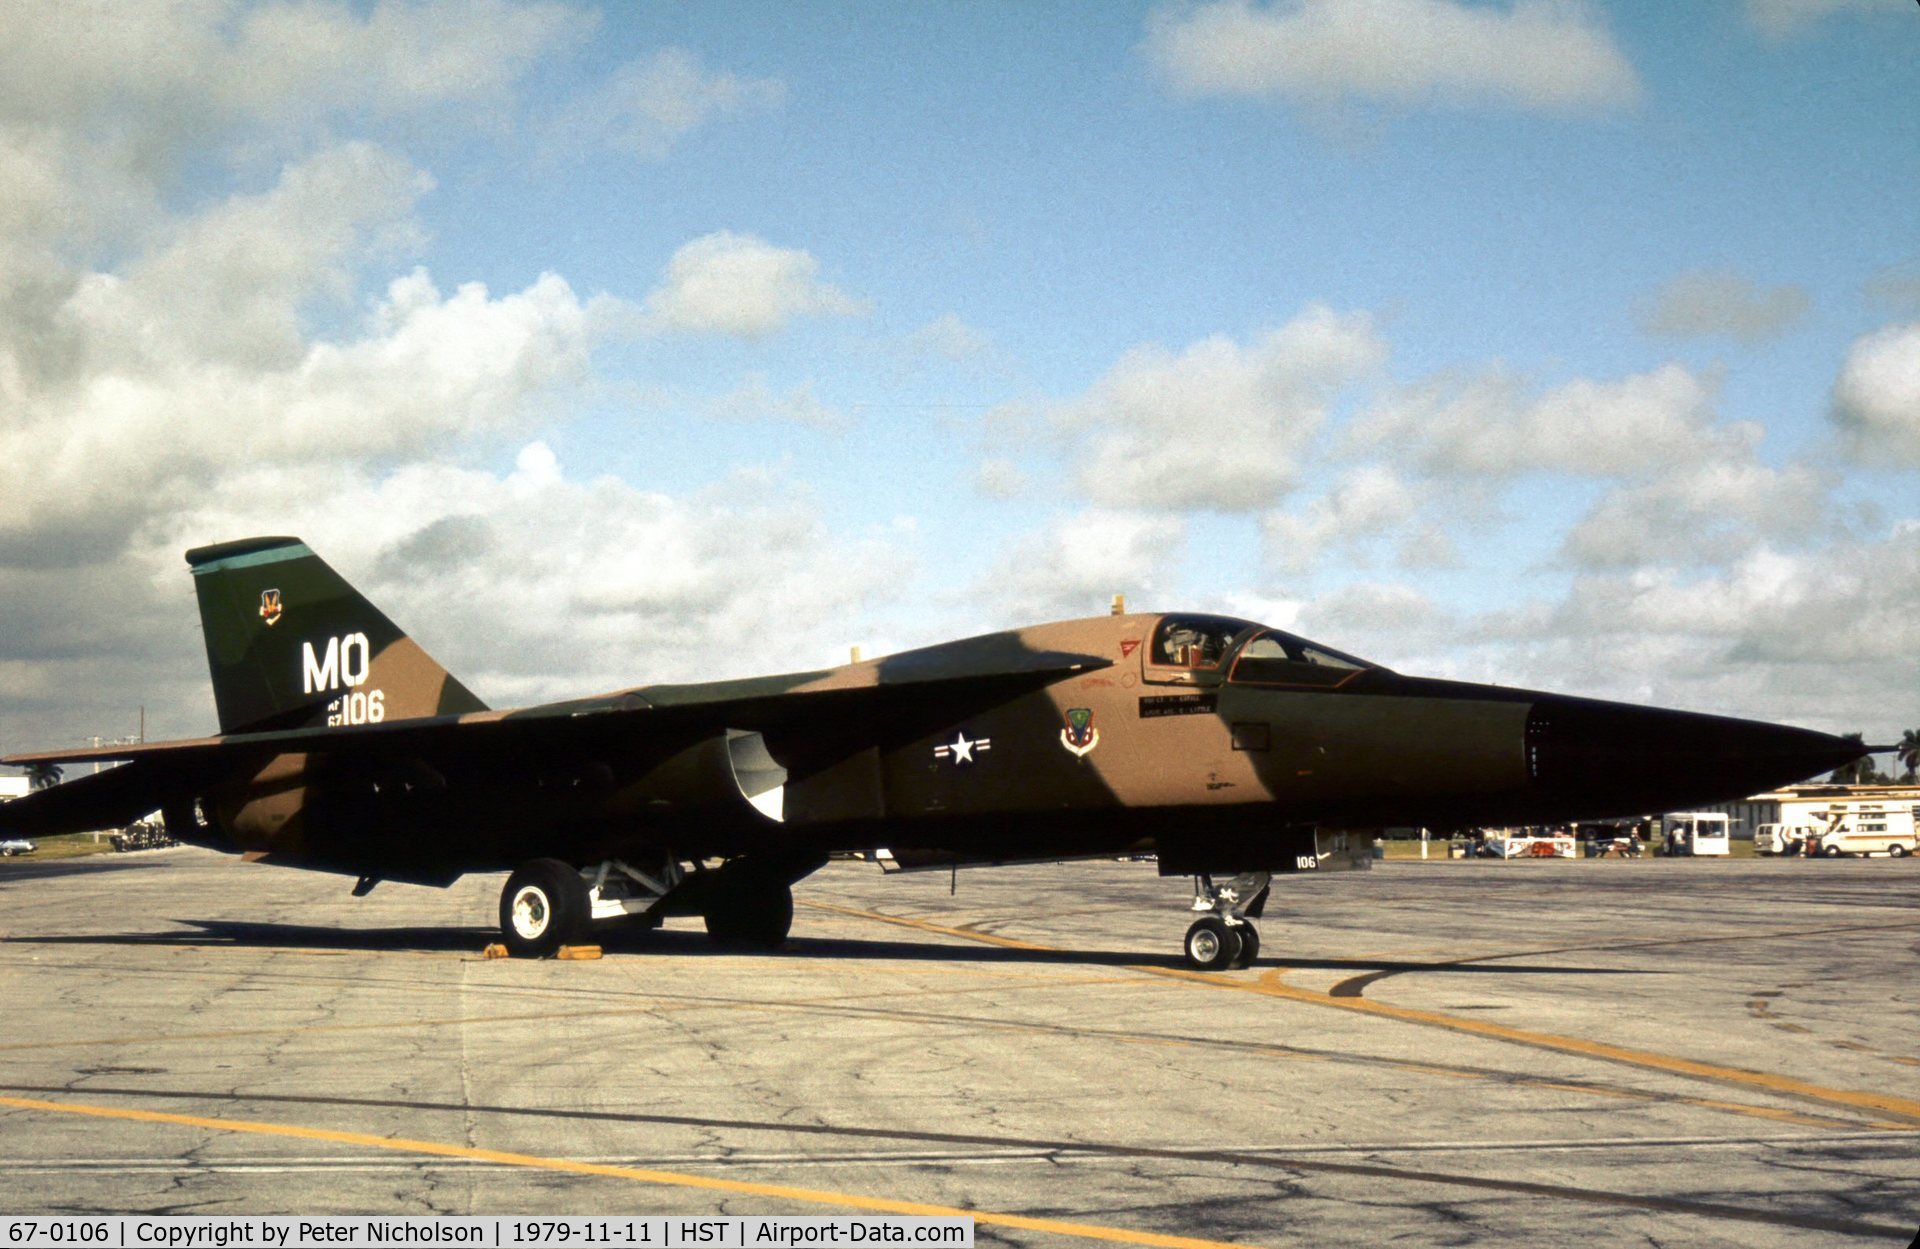 67-0106, 1967 General Dynamics F-111A Aardvark C/N A1-151, F-111A of 366th Tactical Fighter Wing on display at the 1979 Homestead AFB Open House.